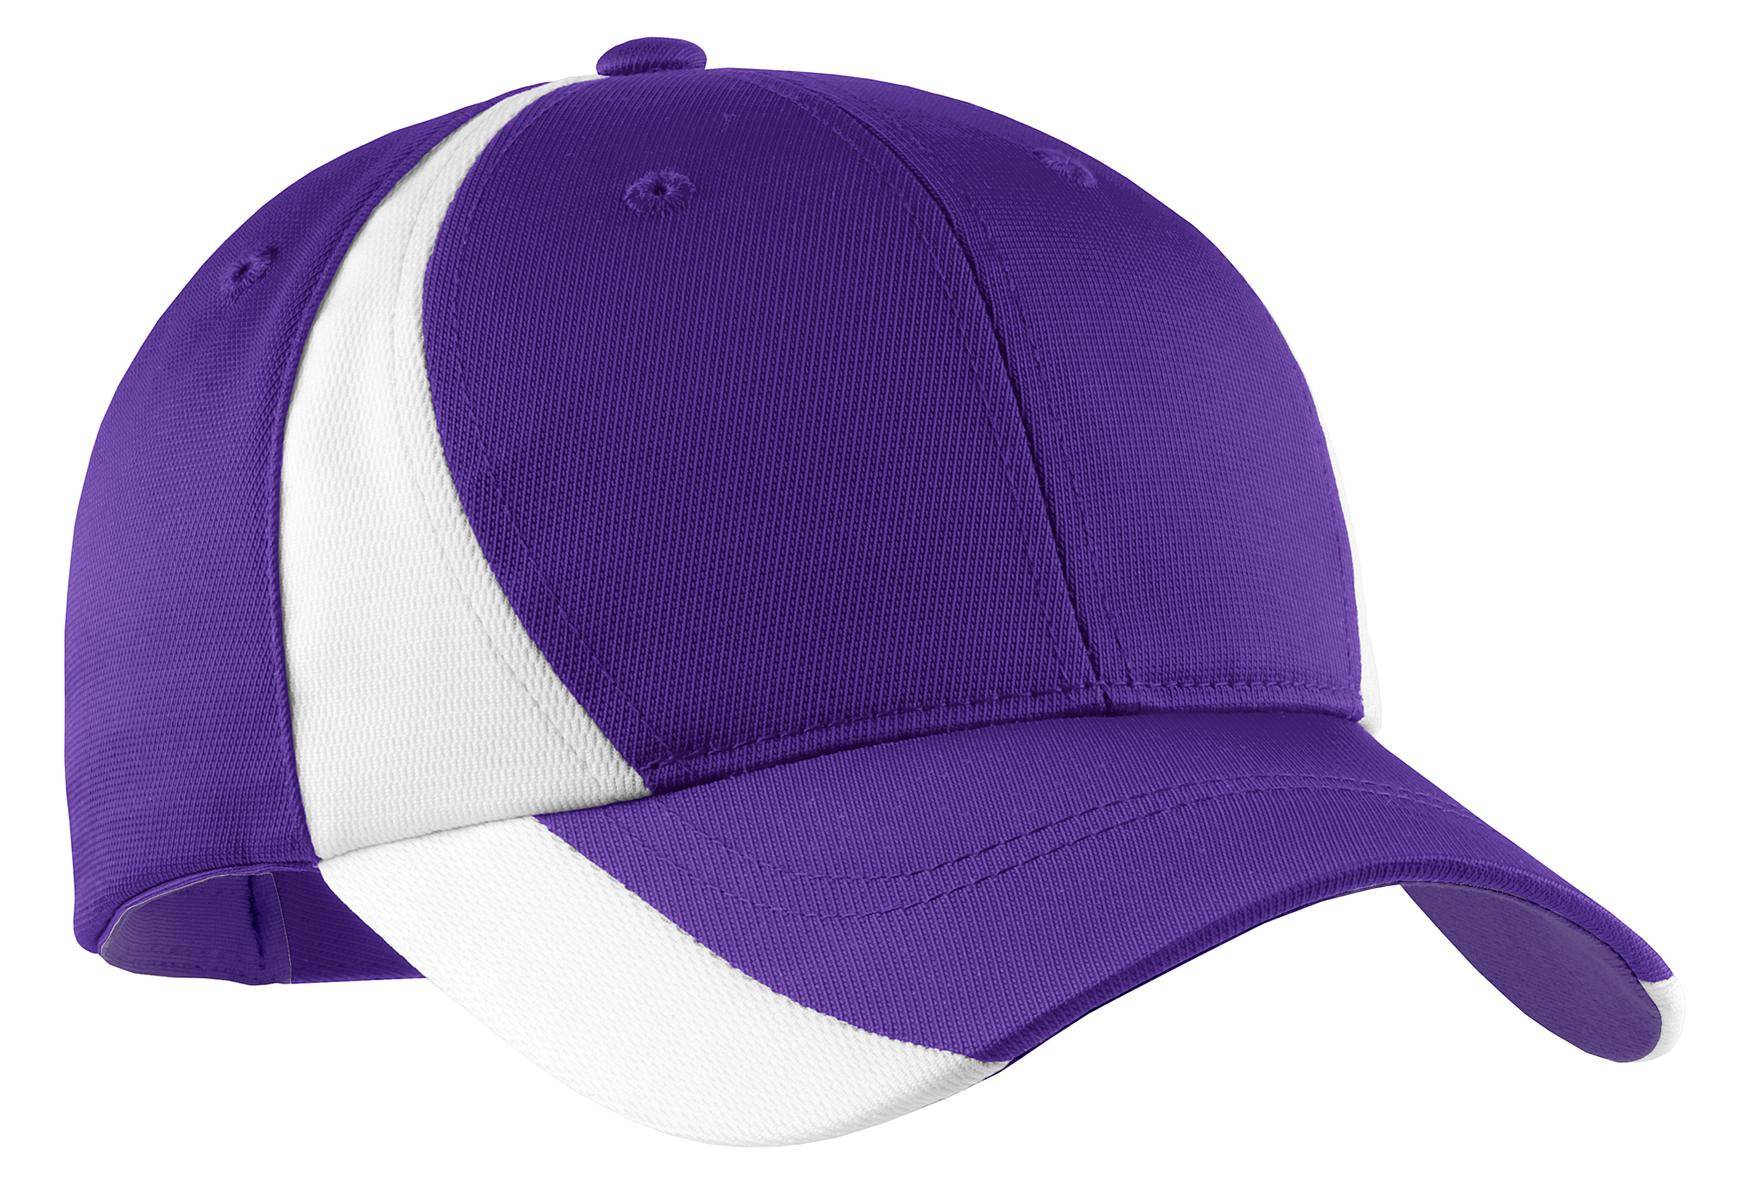 Selected Color is Purple/White